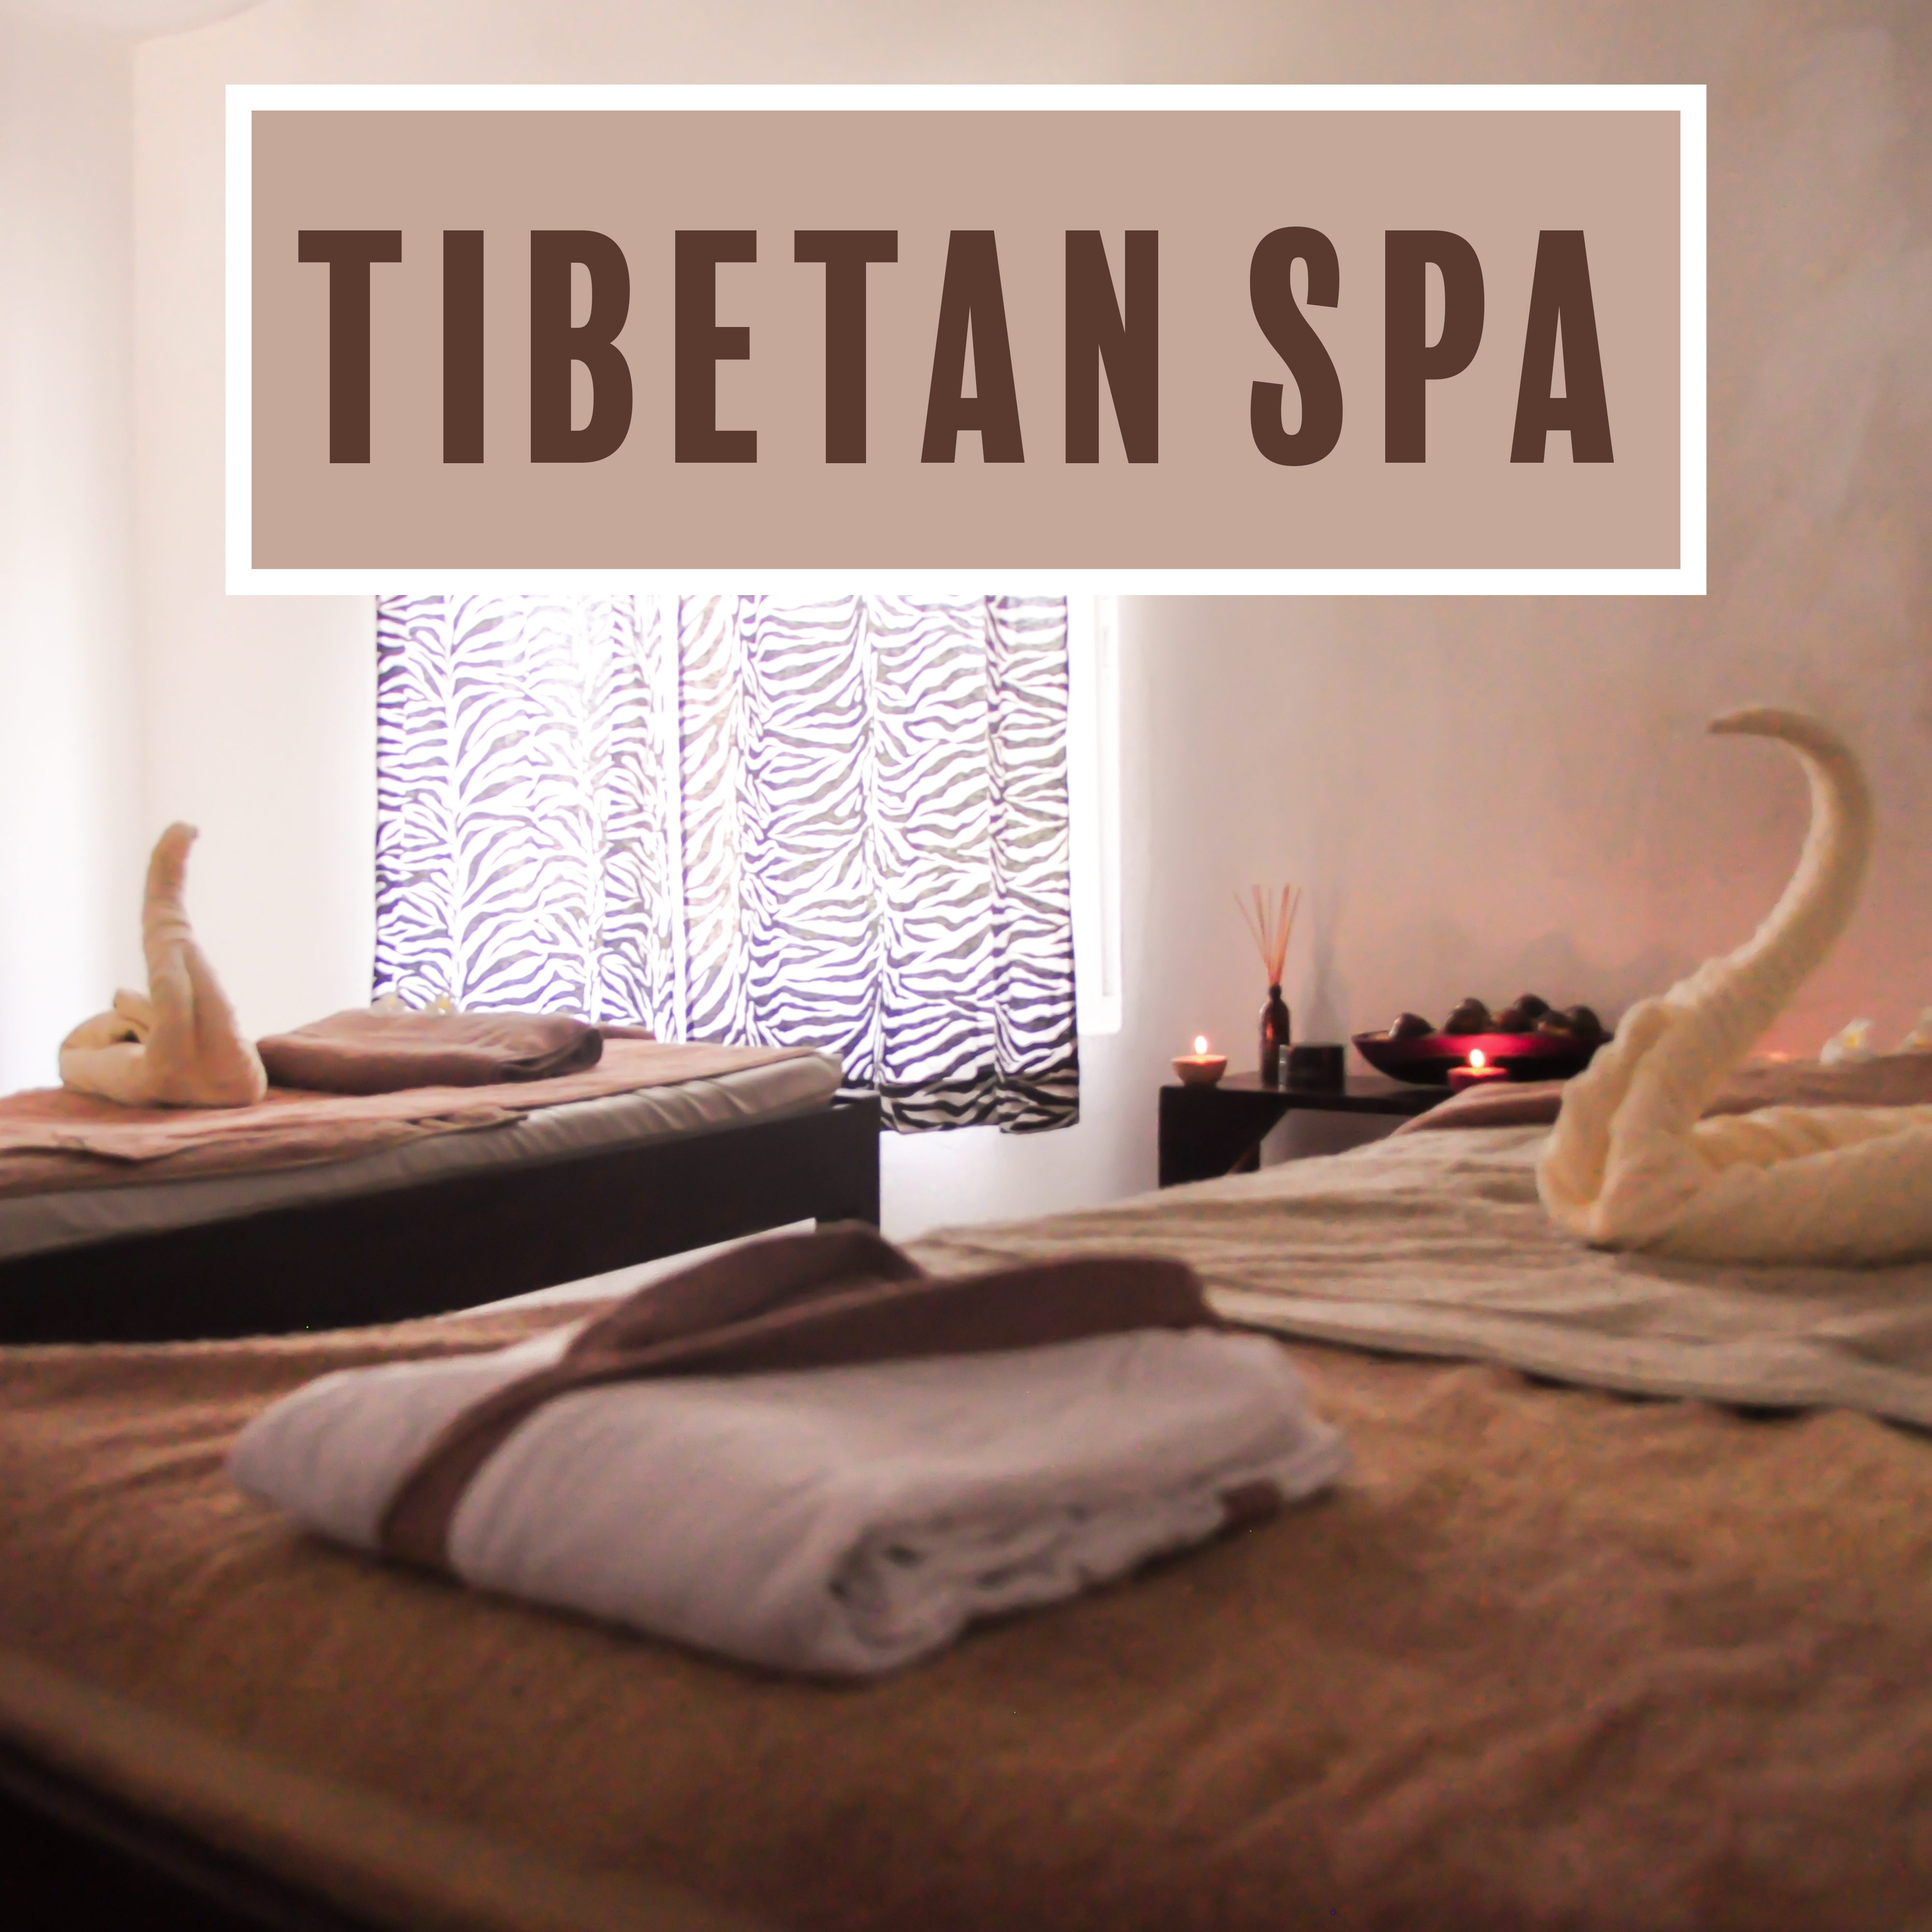 Tibetan Spa – Relaxing Therapy for Relaxation, Wellness, Calm Massage, Relief for Body, Kundalini, Nature Sounds to Rest